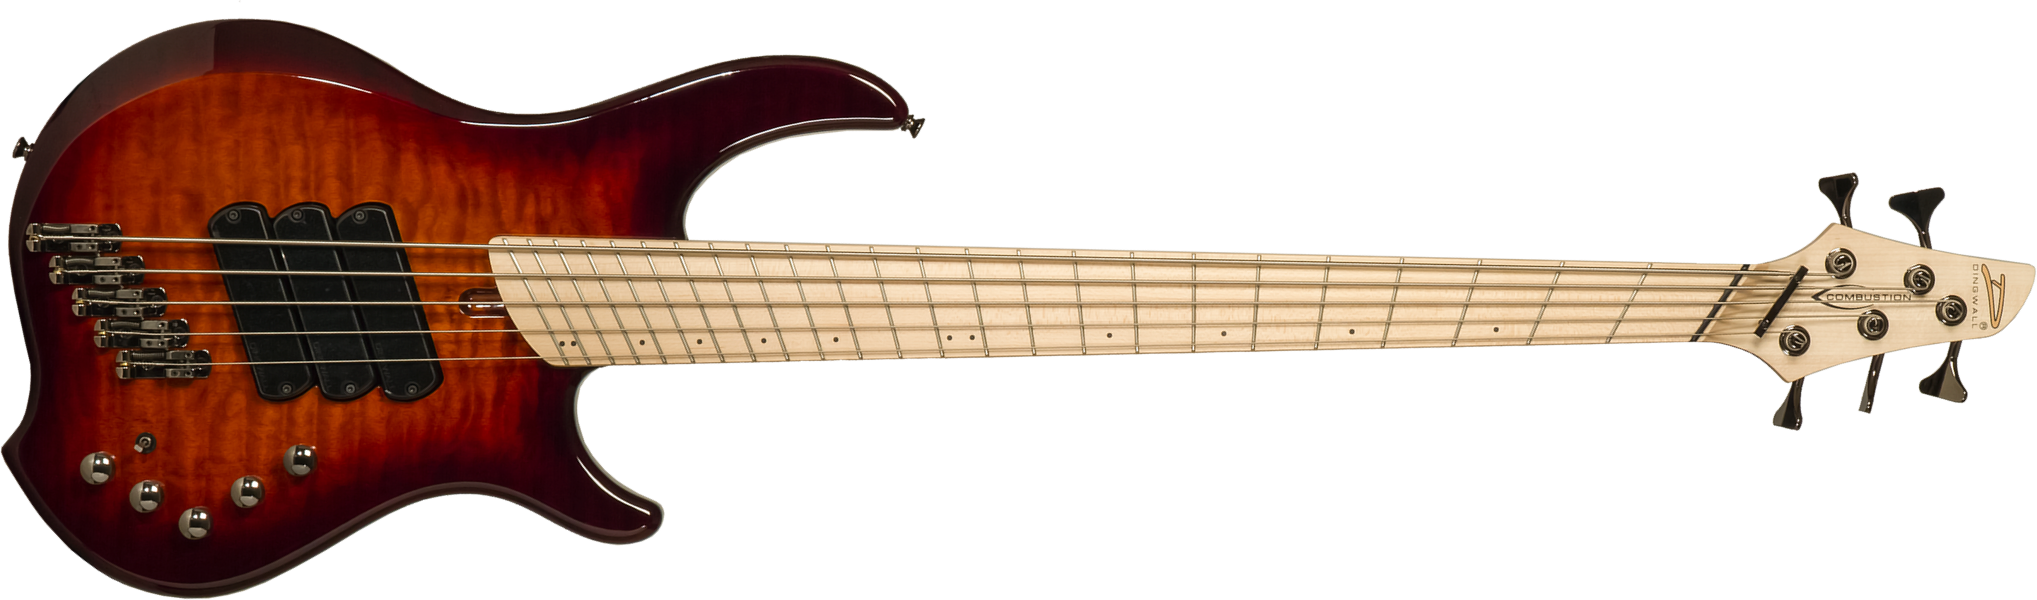 Dingwall Combustion Cb3 5c 3pu Active Mn - Vintage Burst Gloss - Solid body electric bass - Main picture